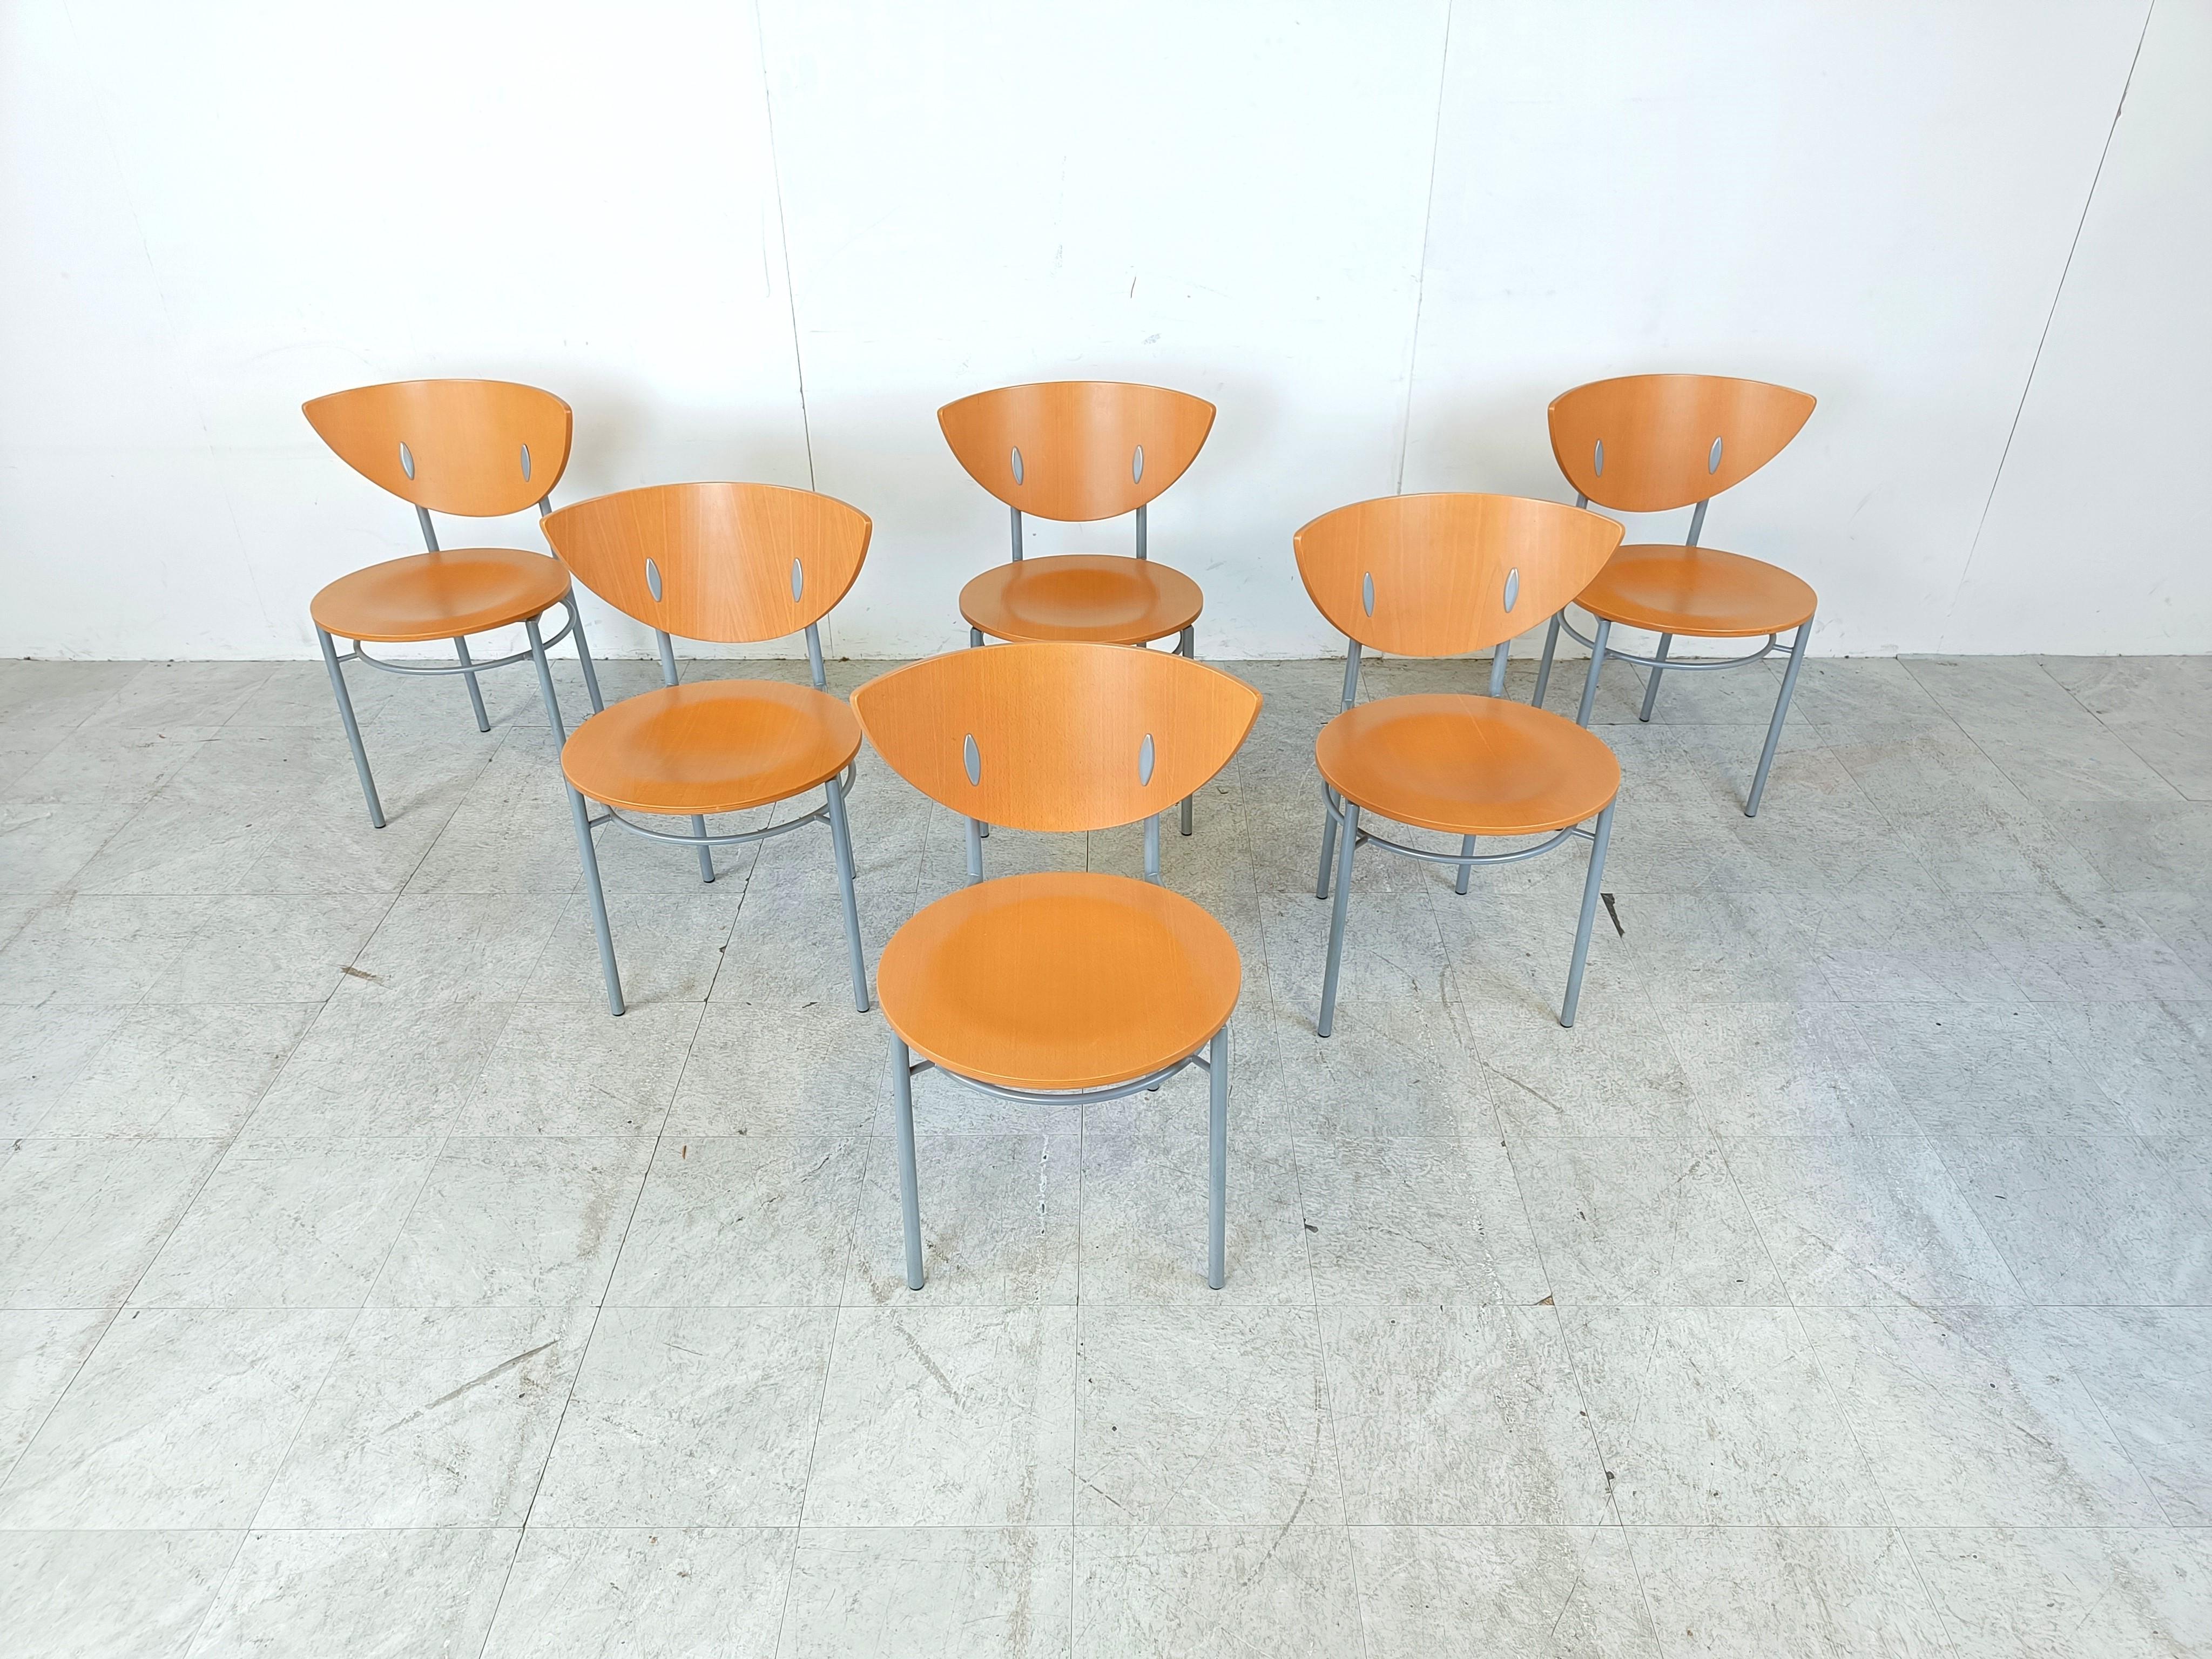 Set of 6 postmodern design dining chairs with grey metal frames and plywood seats.

Timeless and elegant design.

Very sturdy chairs

1990s - Belgium

Dimensions:
Height: 75cm/29.52